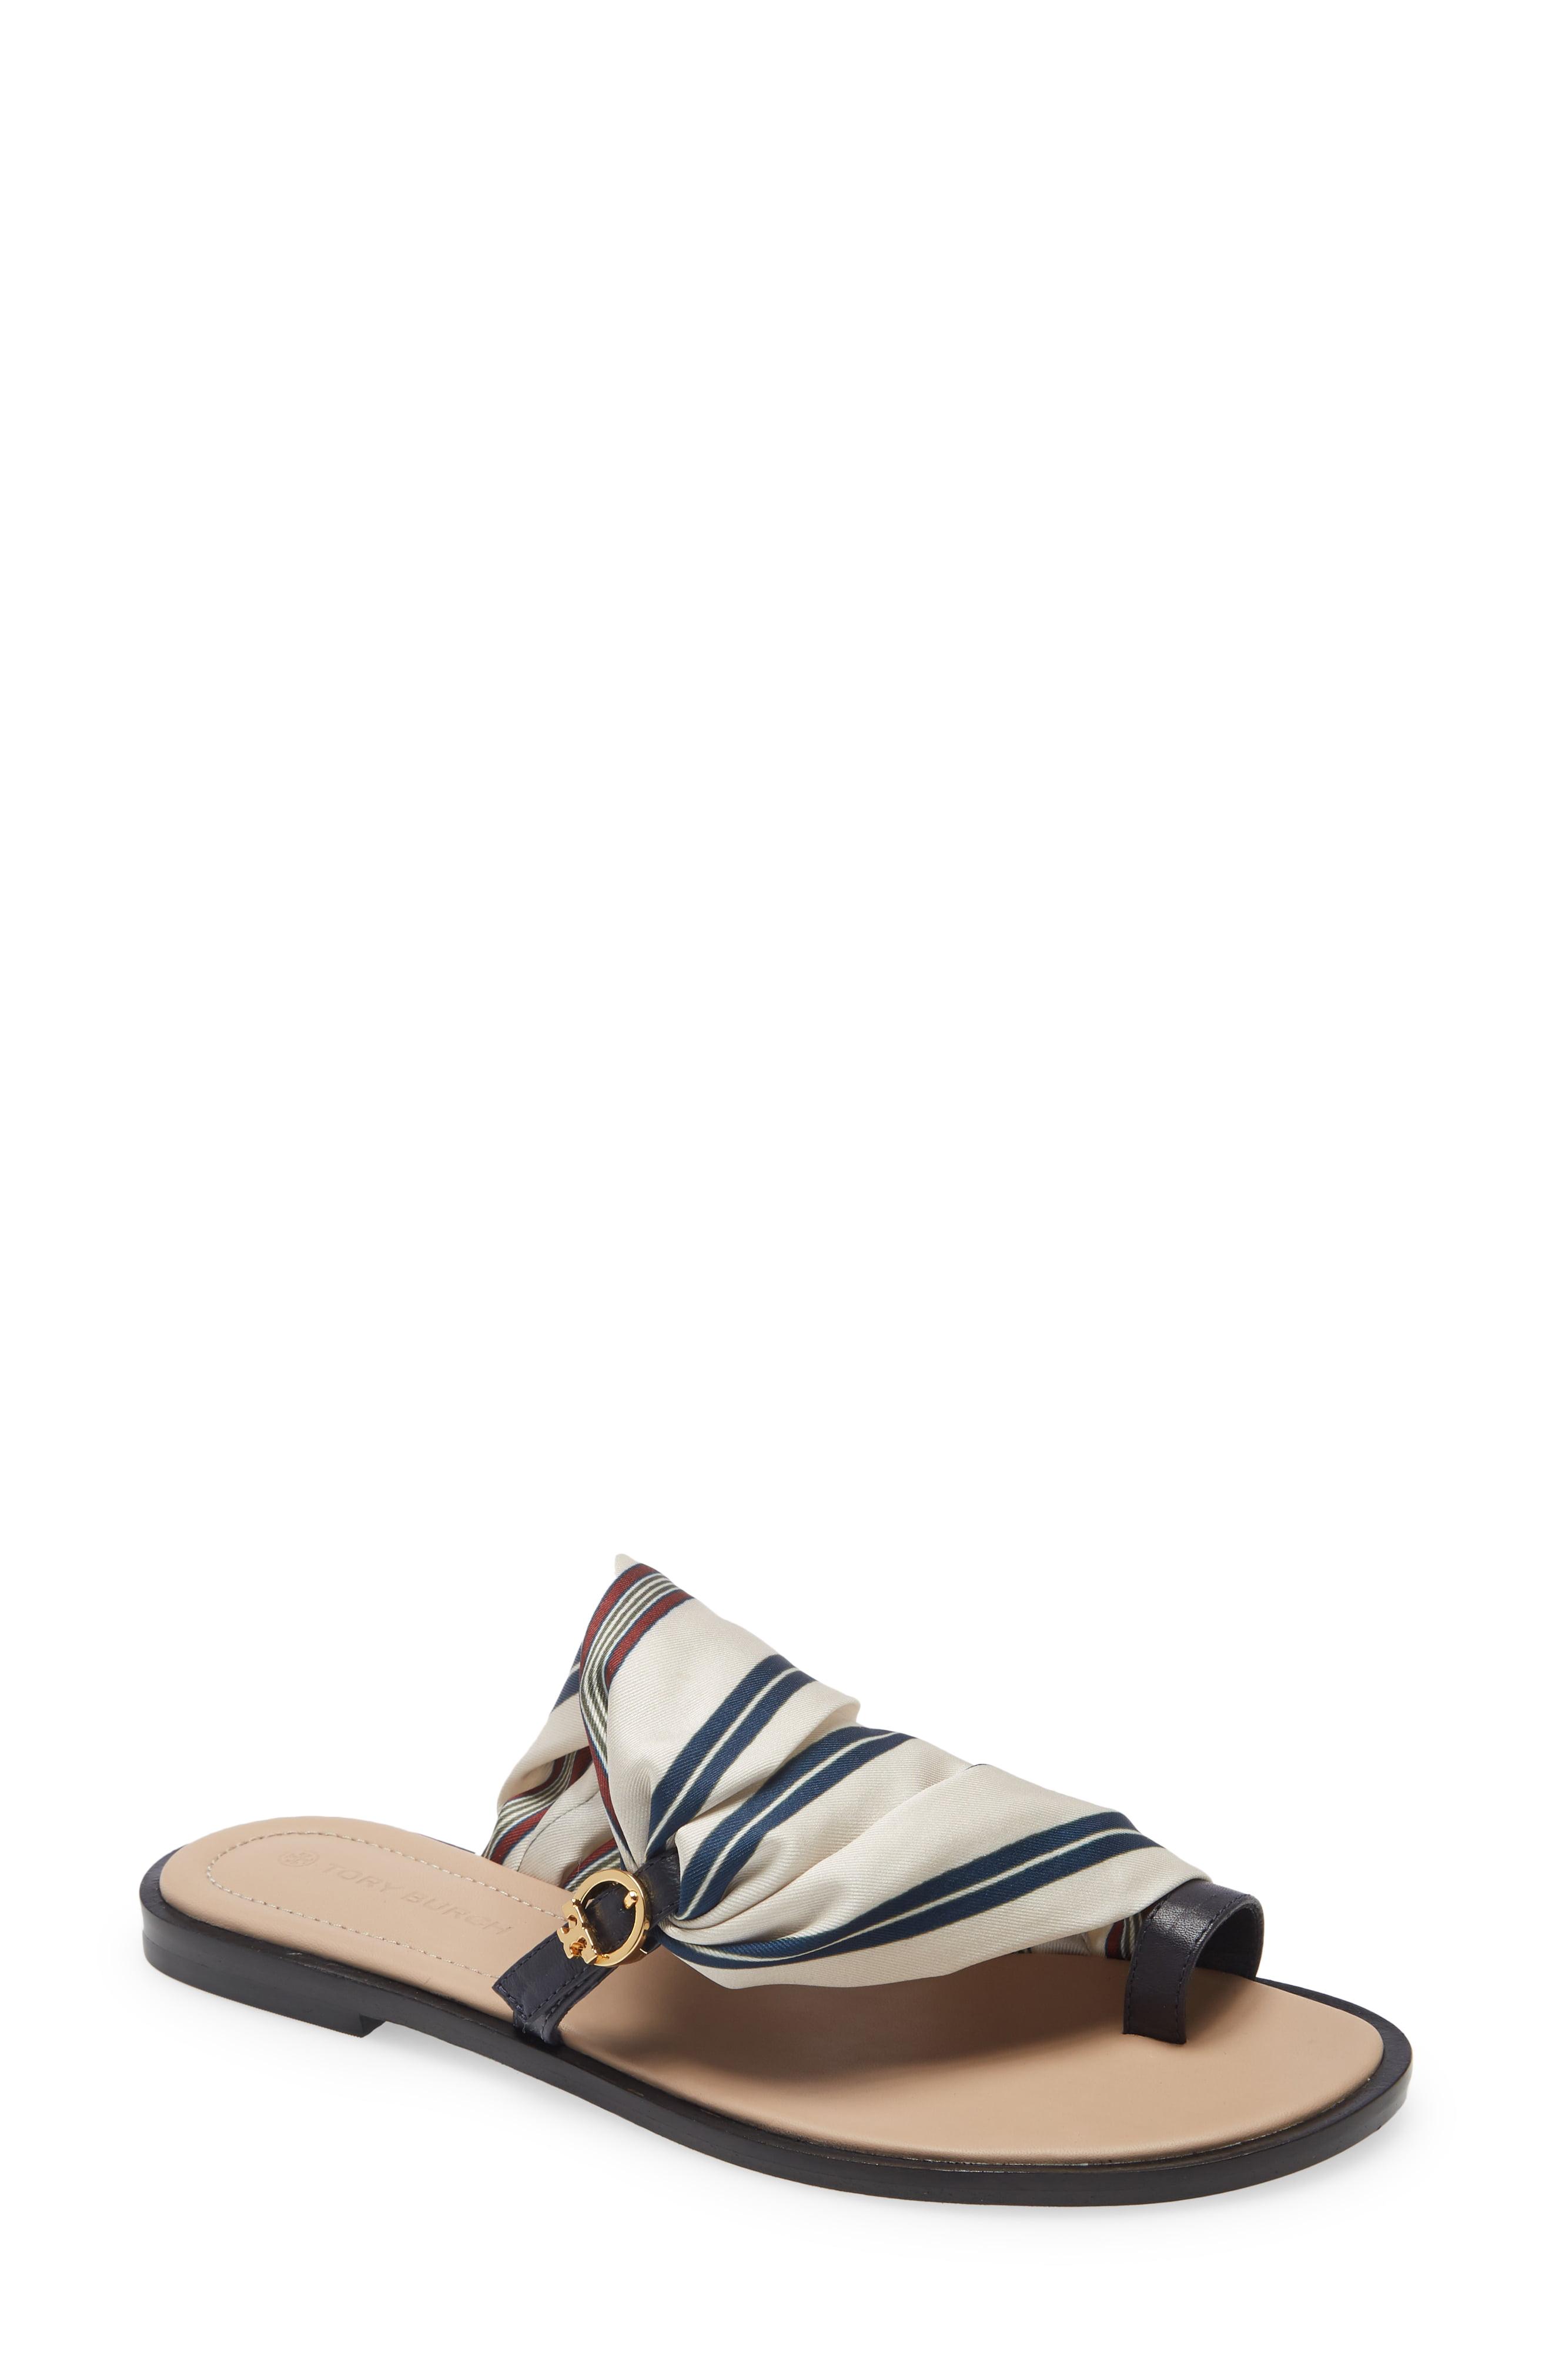 selby scarf sandal tory burch